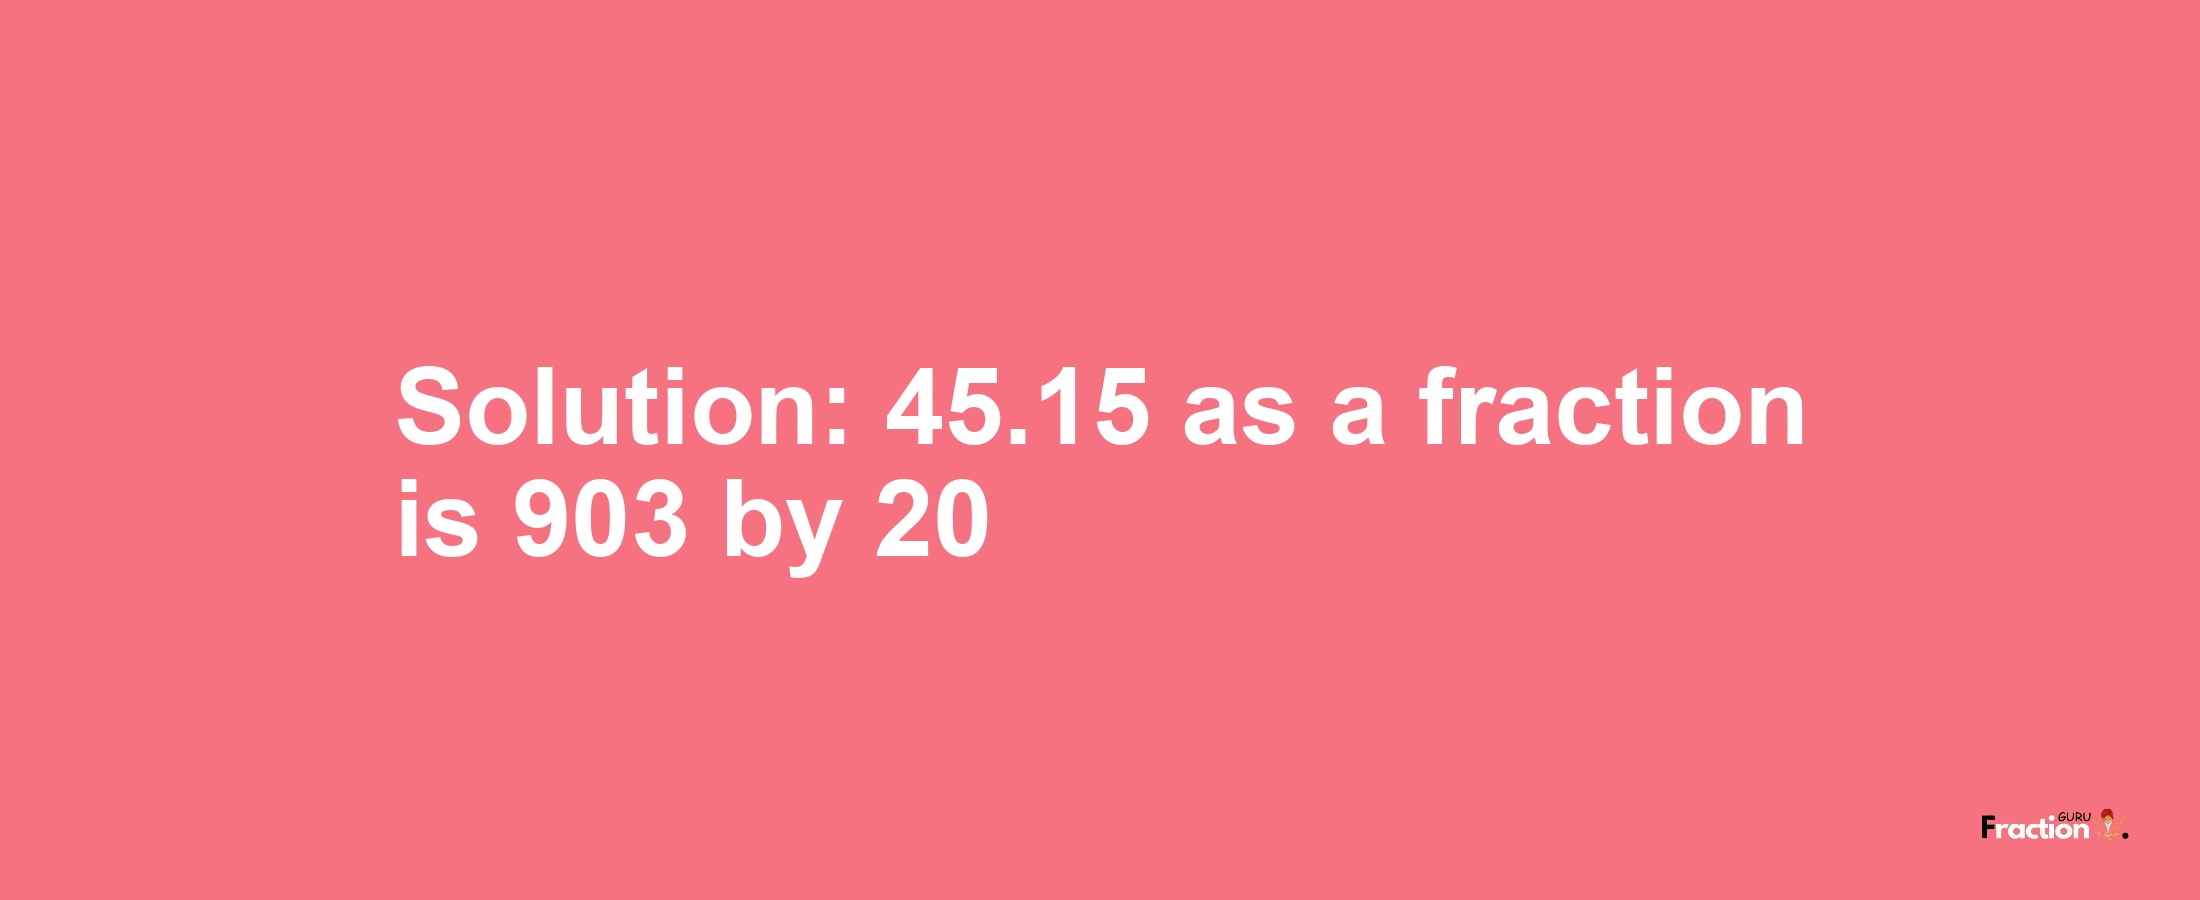 Solution:45.15 as a fraction is 903/20